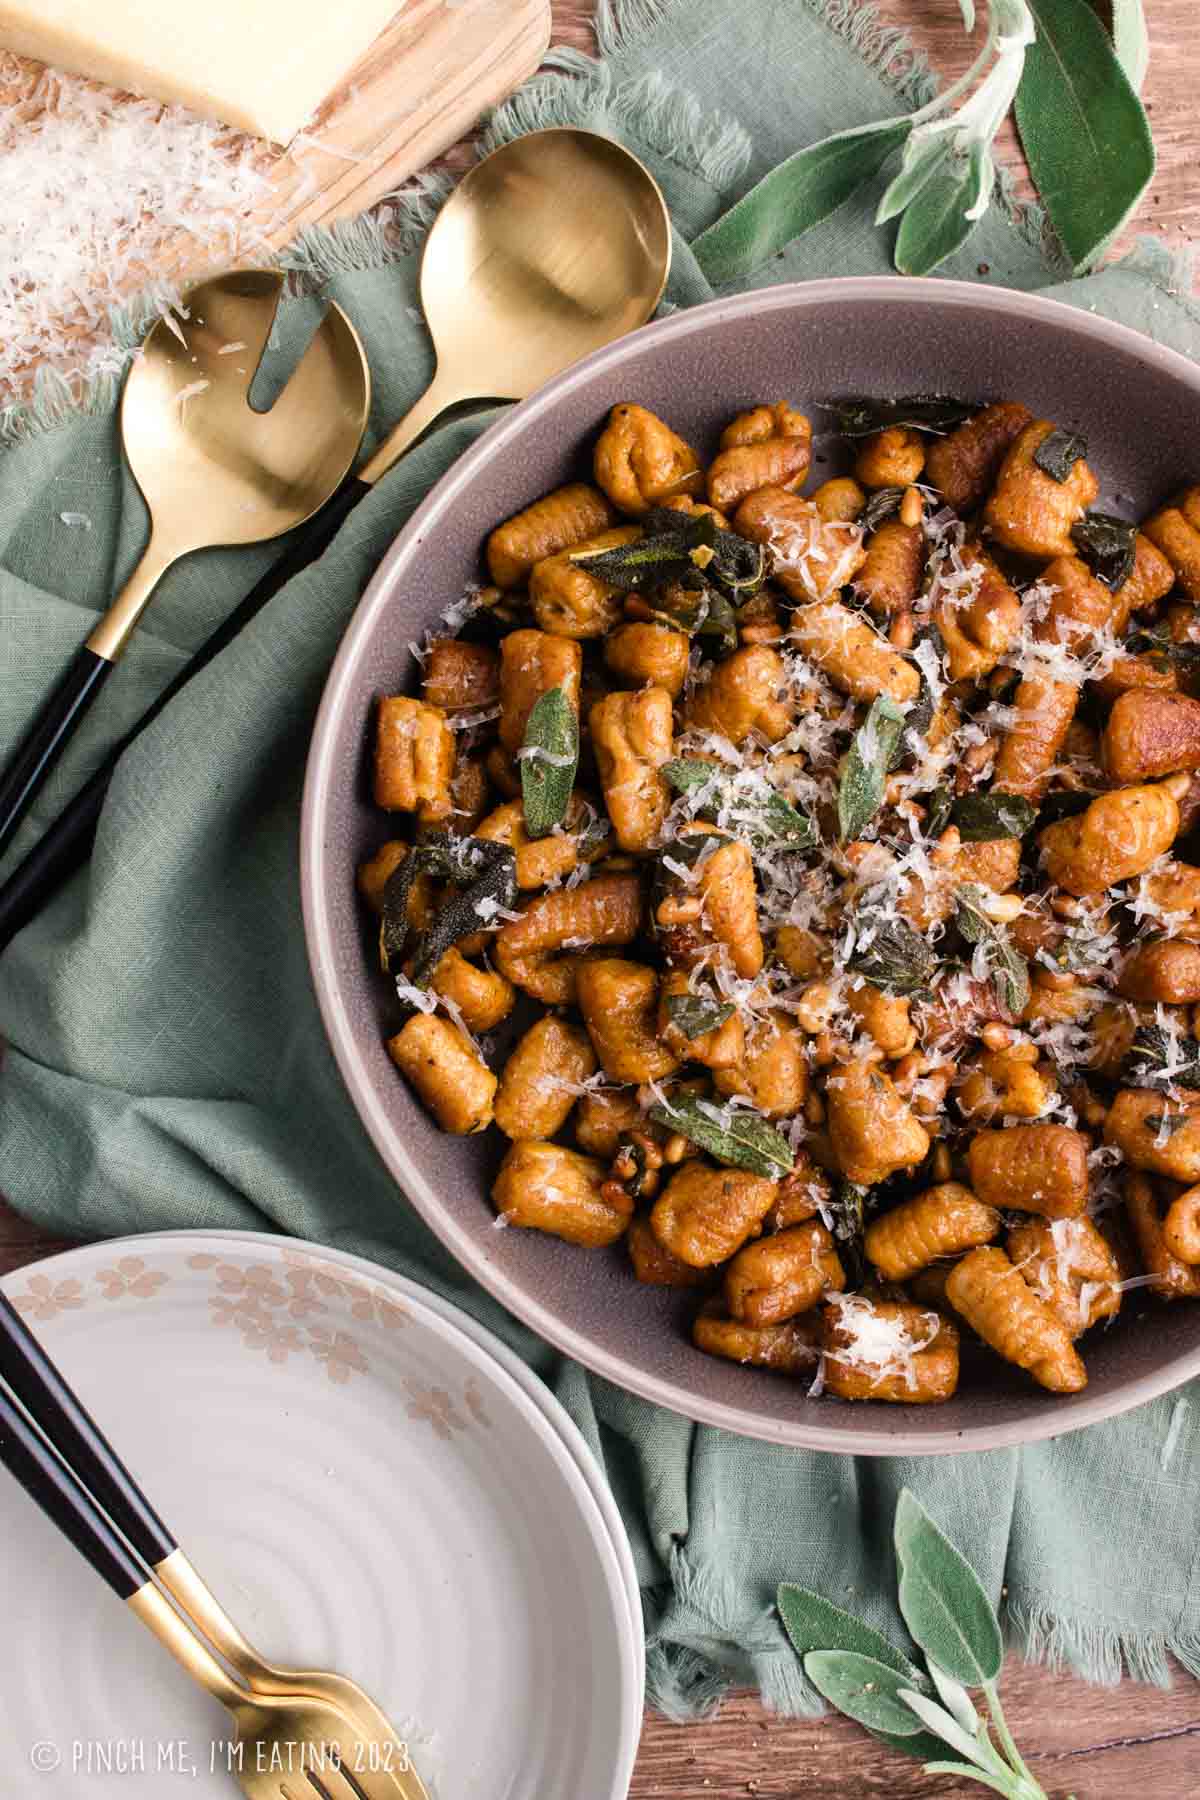 Homemade pumpkin gnocchi with crispy sage, pine nuts, and parmesan cheese in a gray serving bowl on a green napkin.